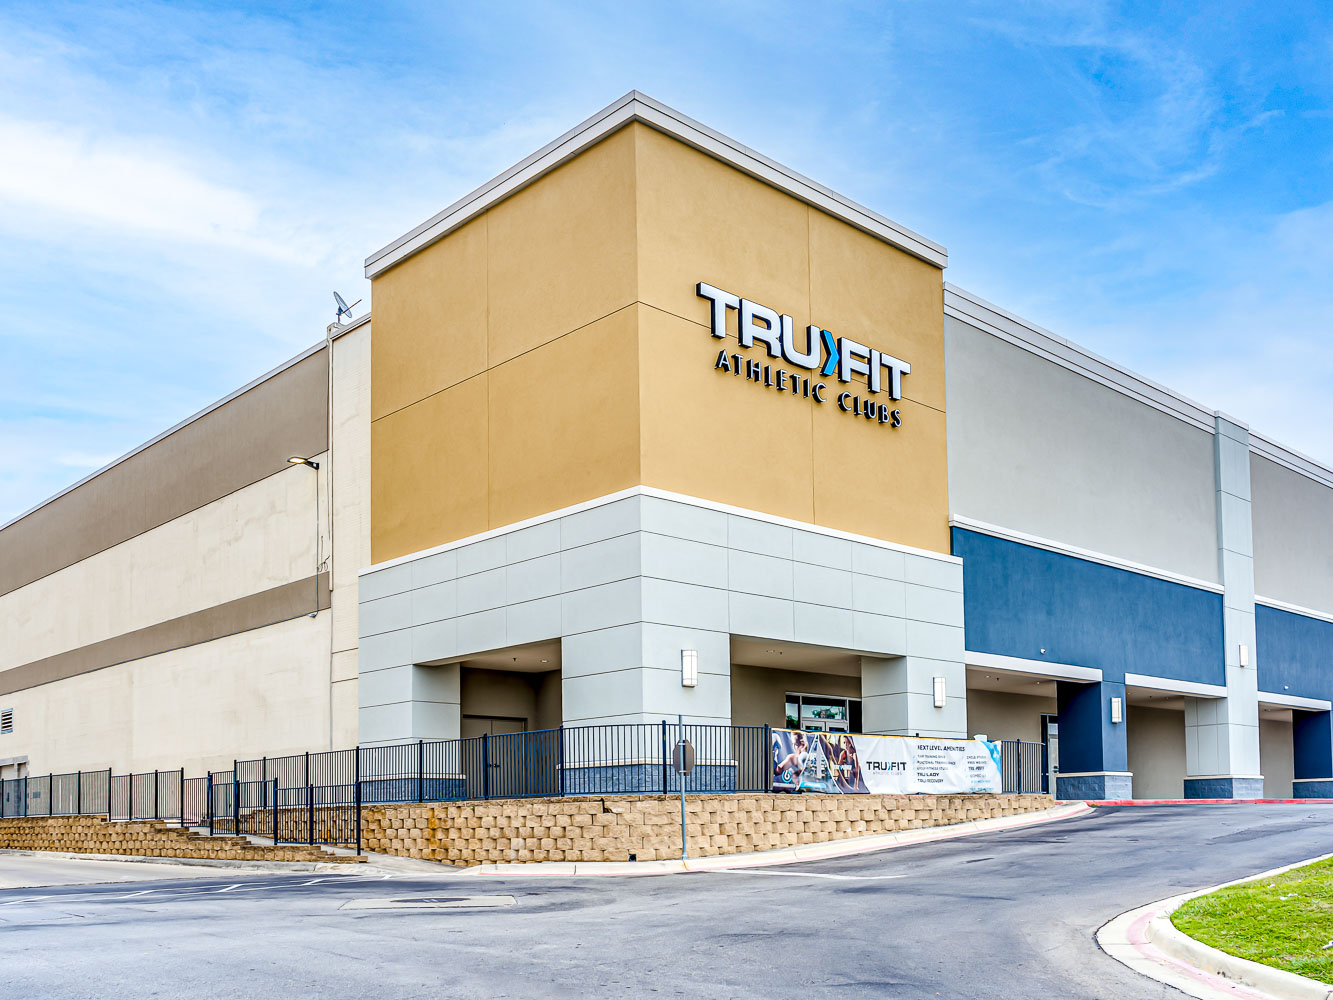 Sneak peak: TruFit Athletic Clubs opening at Sunland Park Mall, Local News